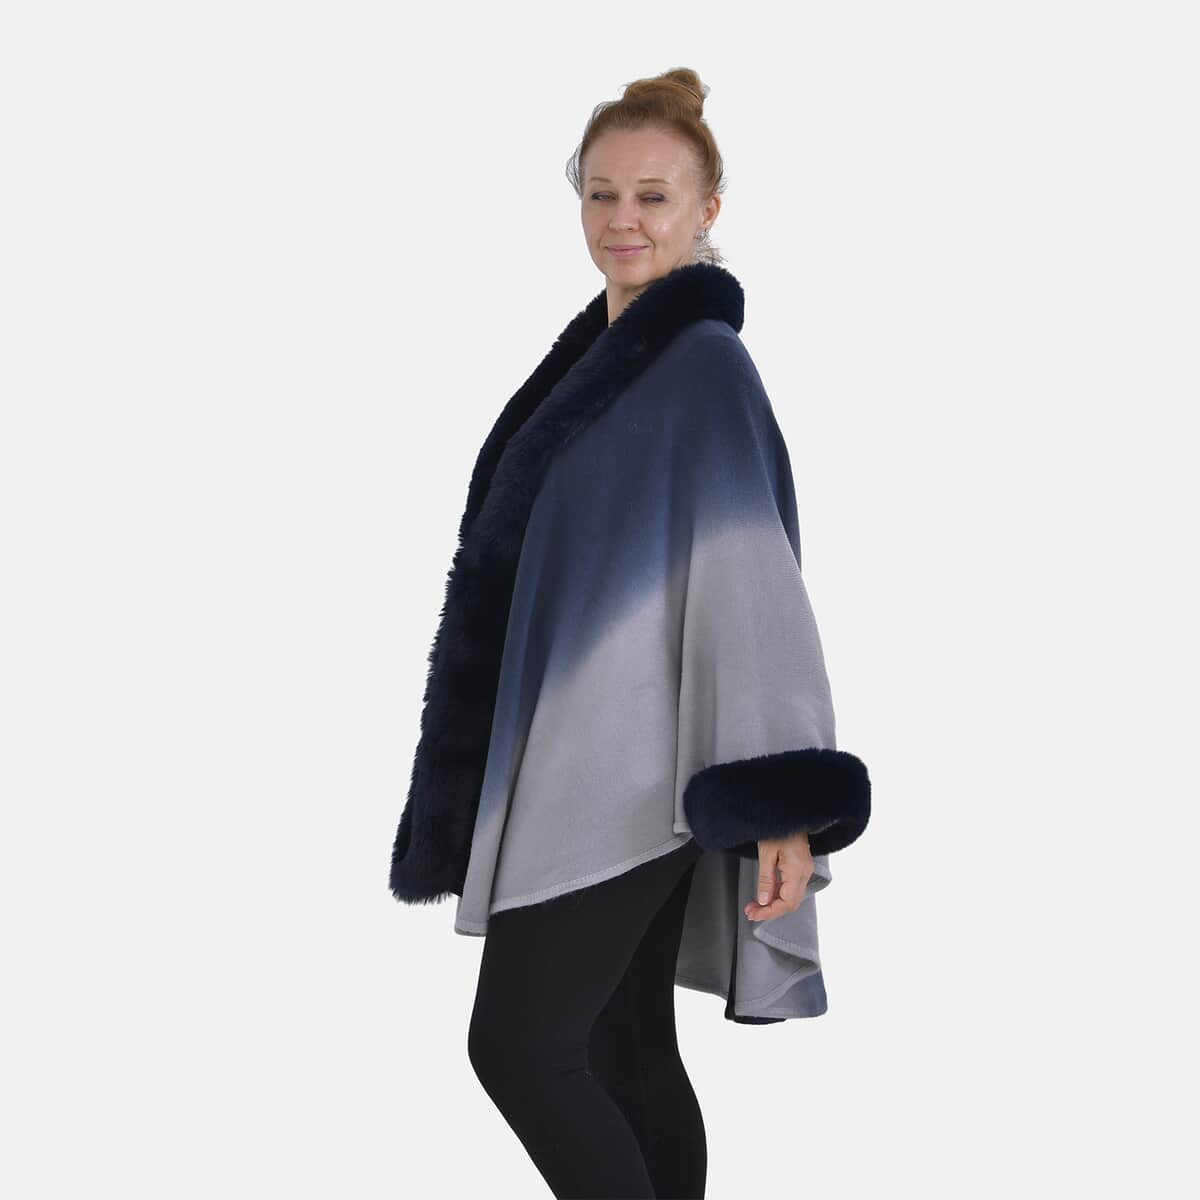 Tamsy Blue Ombre Cape with Faux Fur Trim - One Size Fits Most image number 2